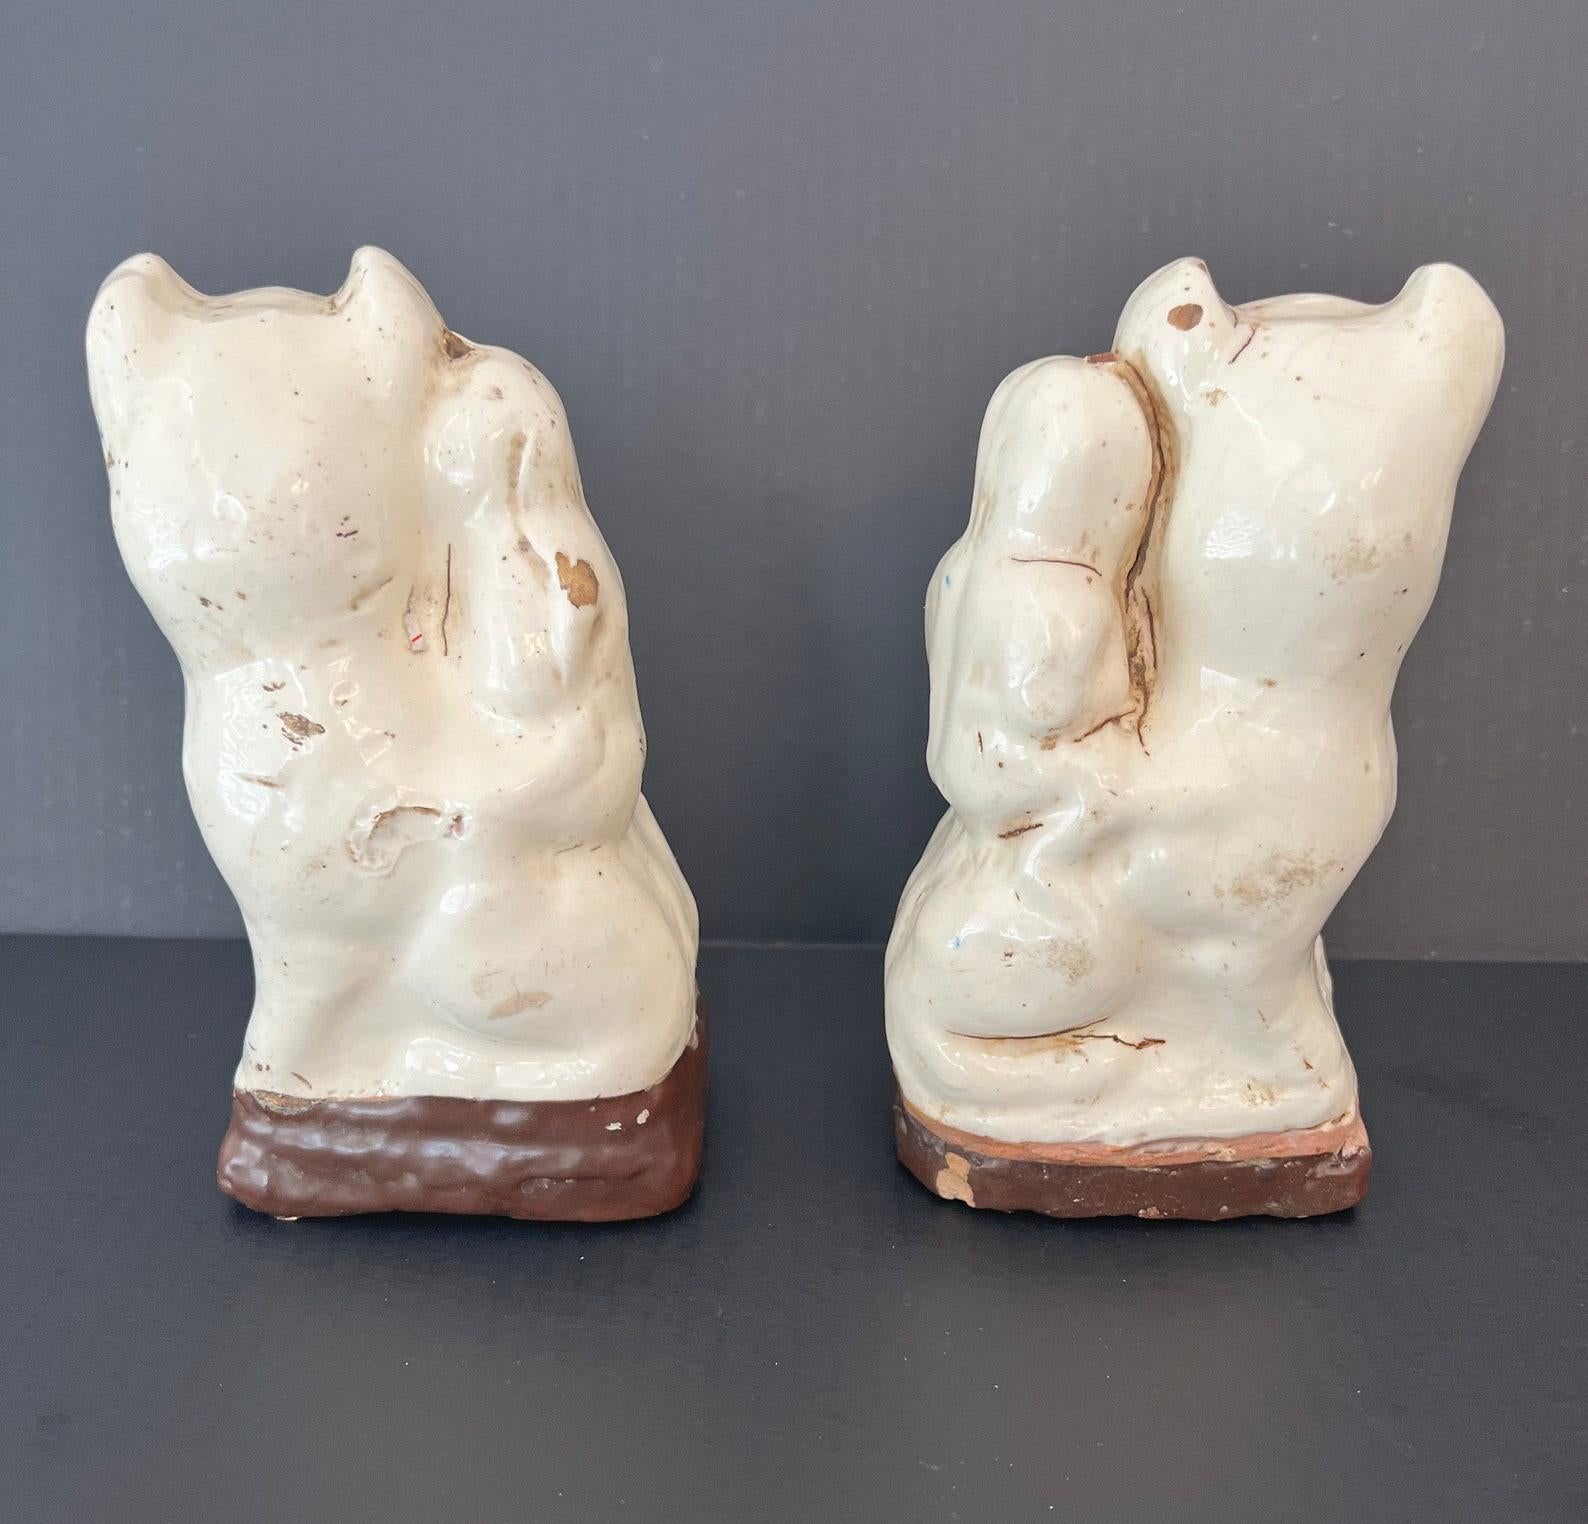 A pair of antique Cizhou-type cream glazed cat (mao) incense stick holders. 

Dating to the early Qing - possibly late Ming Dynasty, scarce near matching mirrored pairs such as this have become exceedingly difficult to find. Born in northern